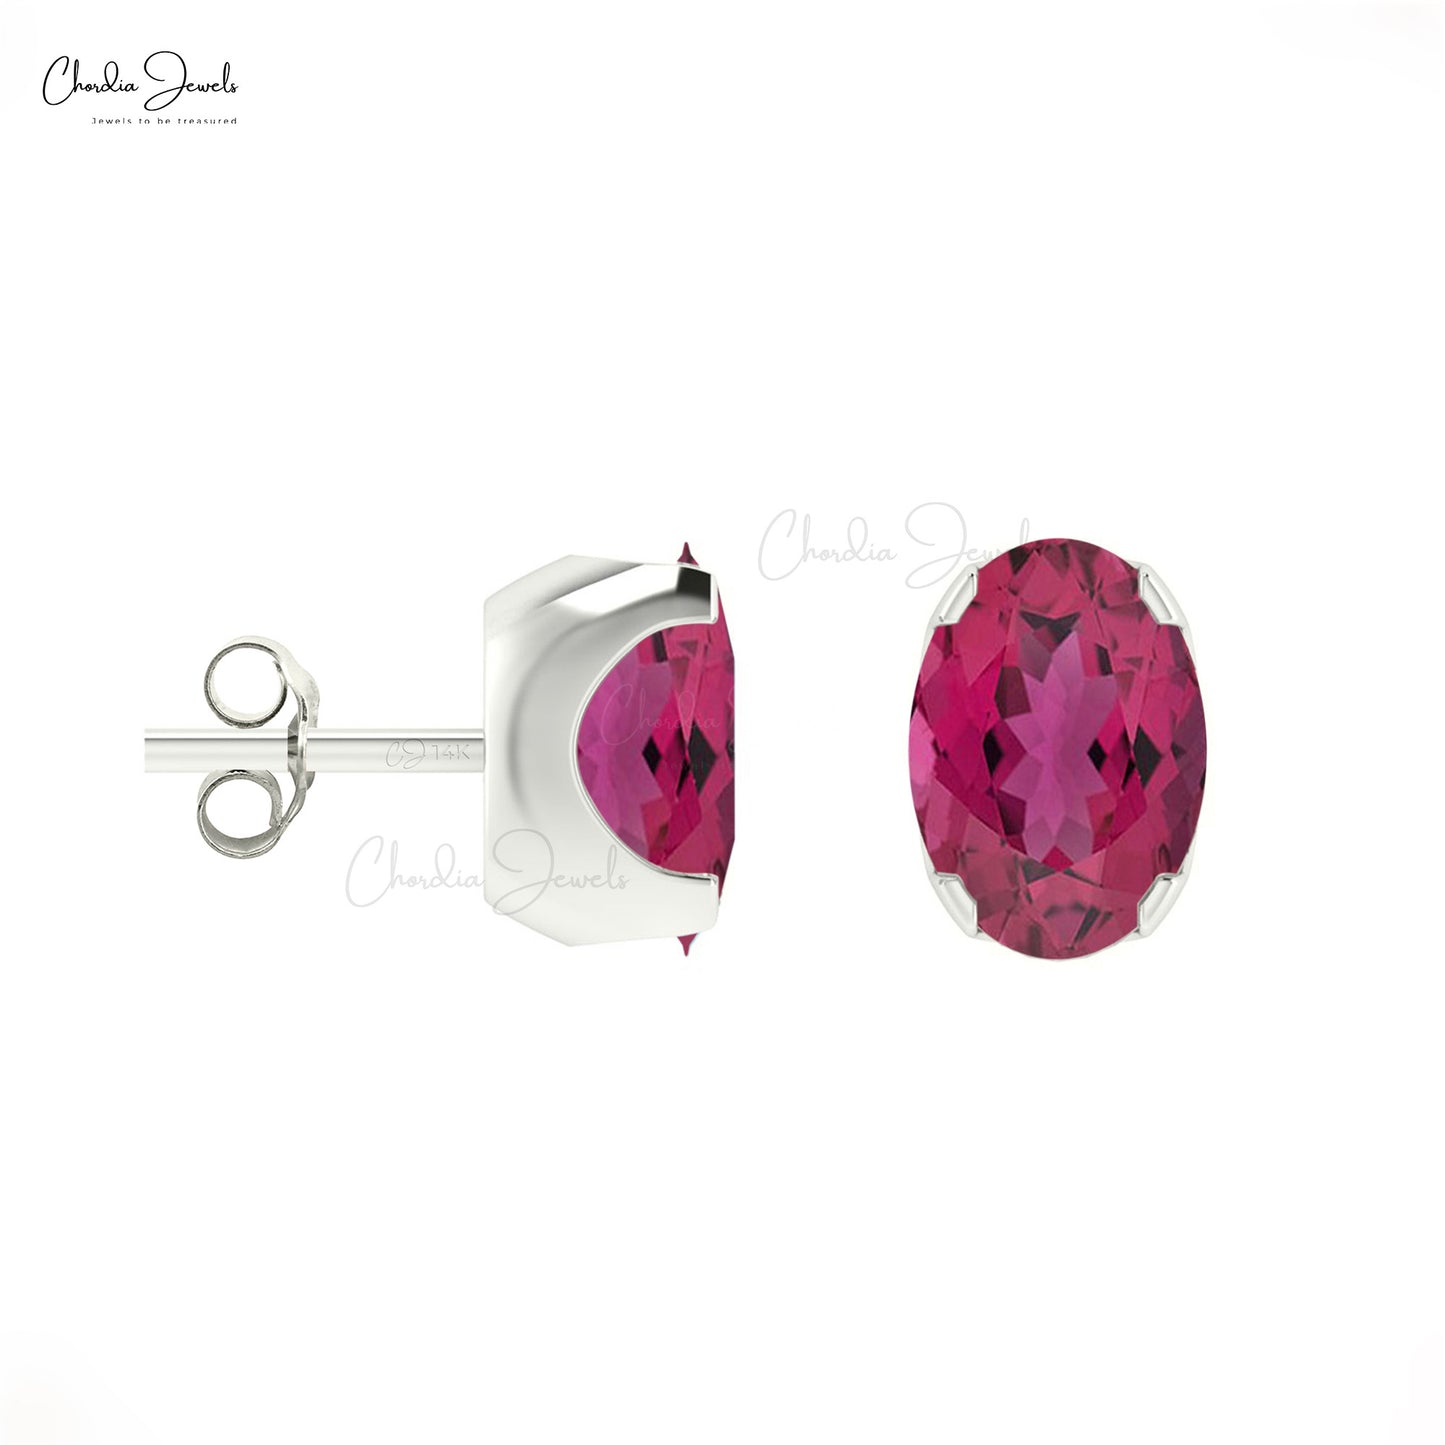 Load image into Gallery viewer, Genuine Pink Tourmaline Oval Cut Gemstone Studs Earring 14k Solid Gold Earrings For October Birthstone
